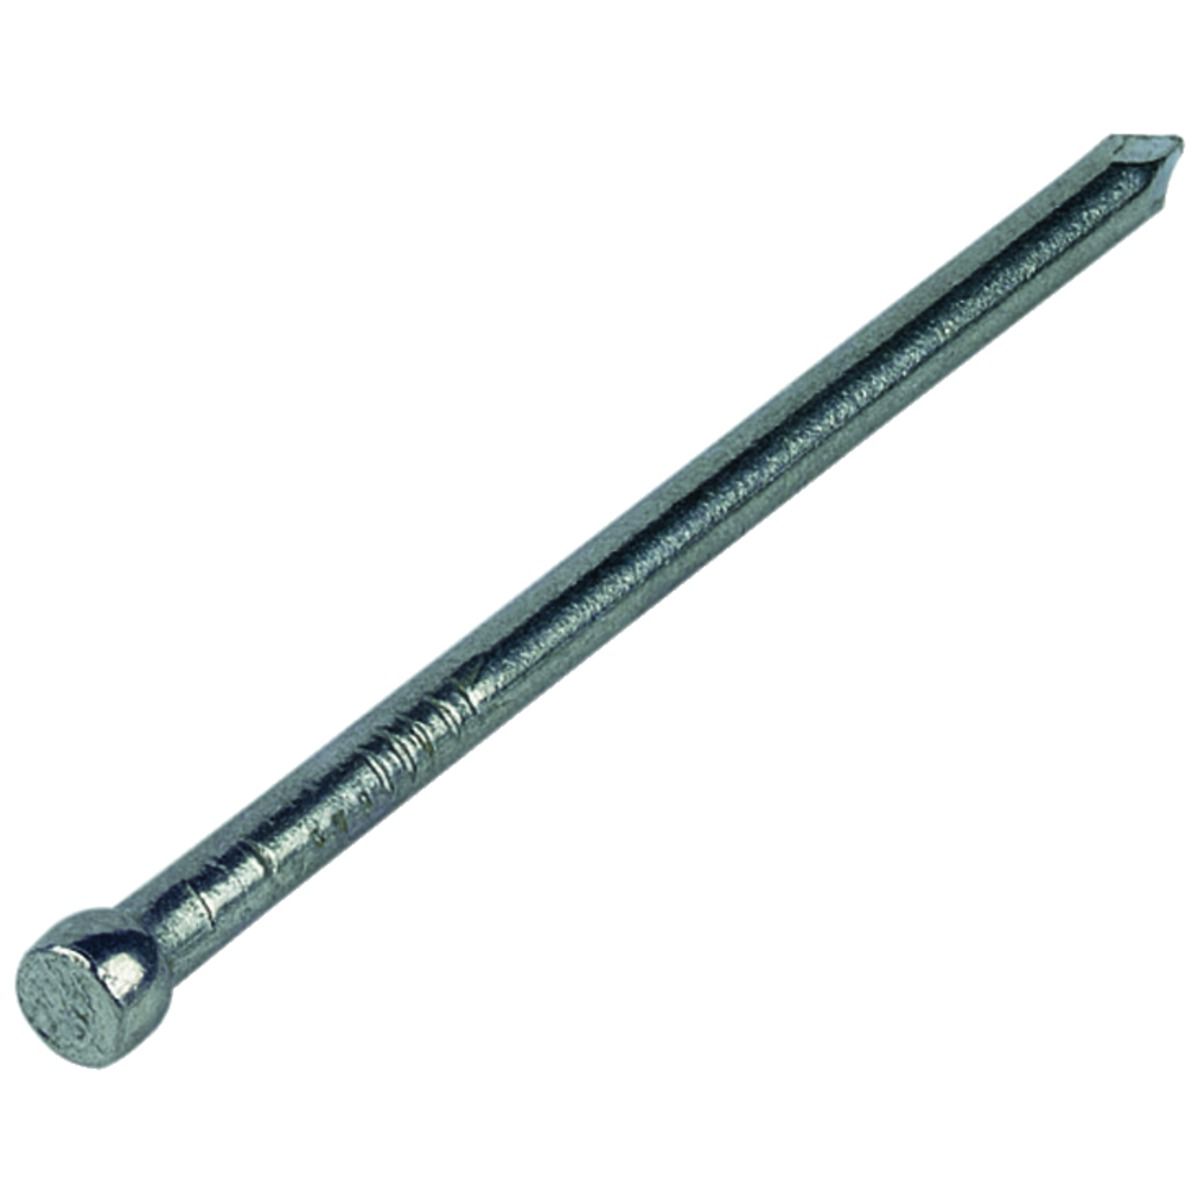 Image of Wickes 40mm Bright Lost Head Nails - 400g